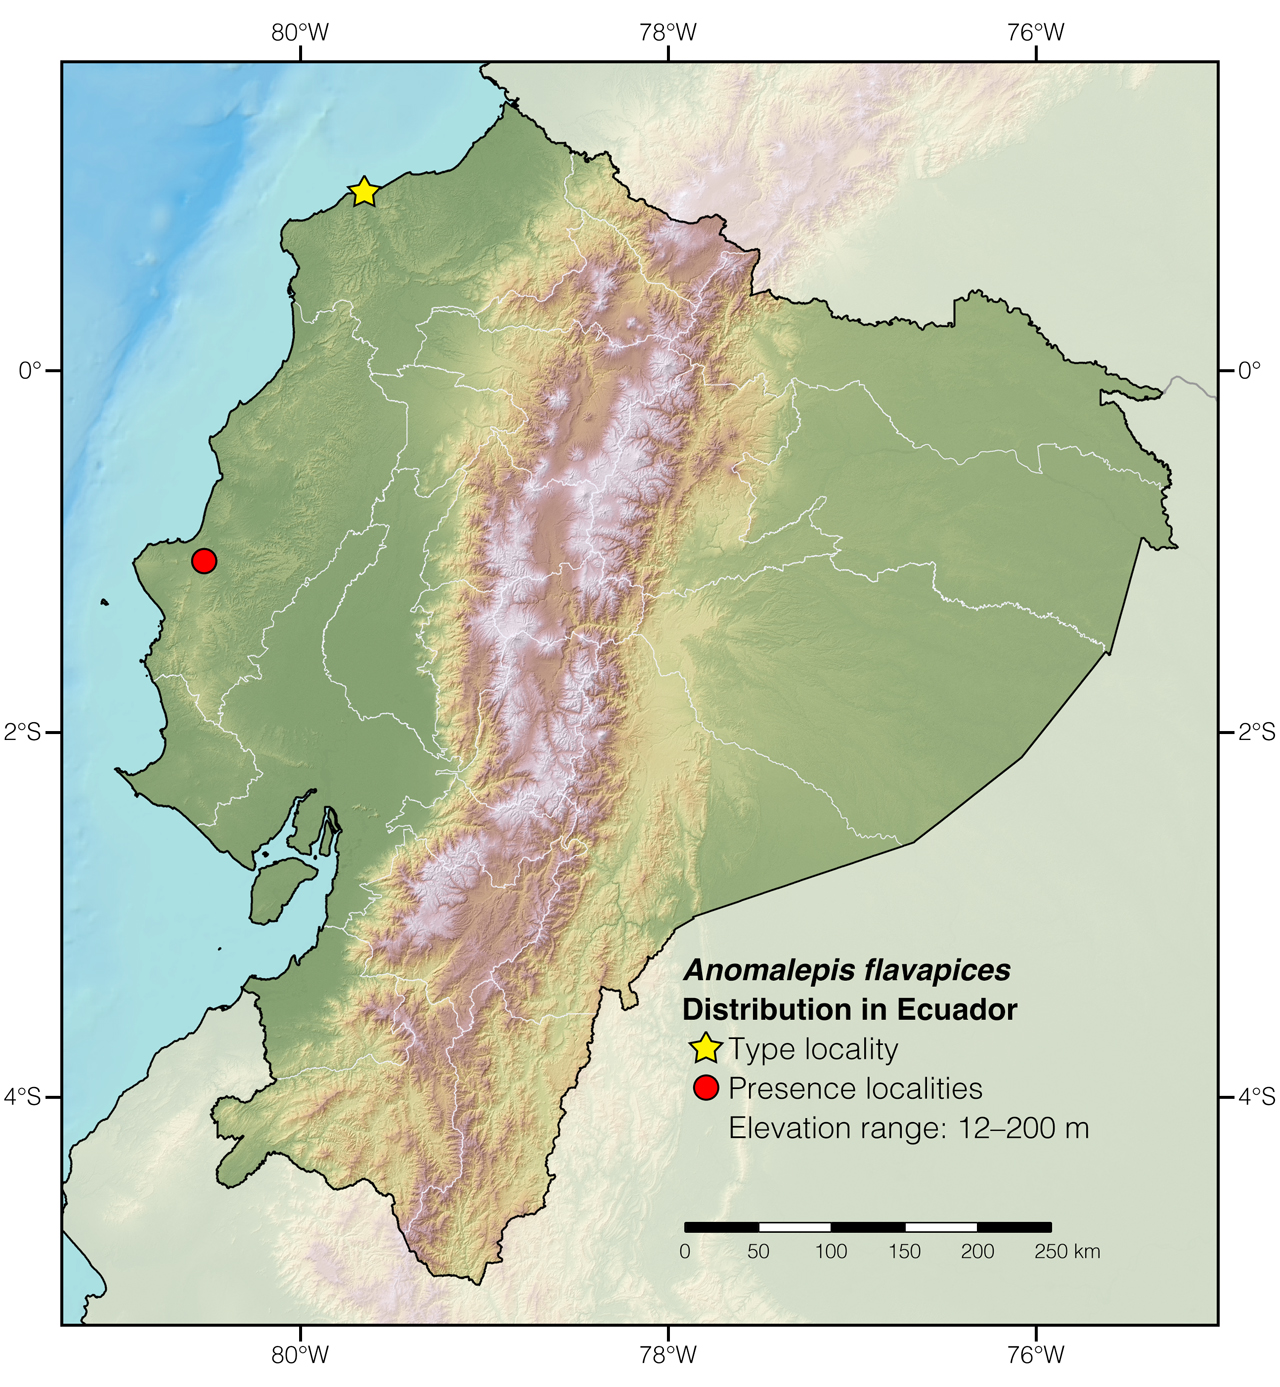 Distribution of Anomalepis flavapices in Ecuador